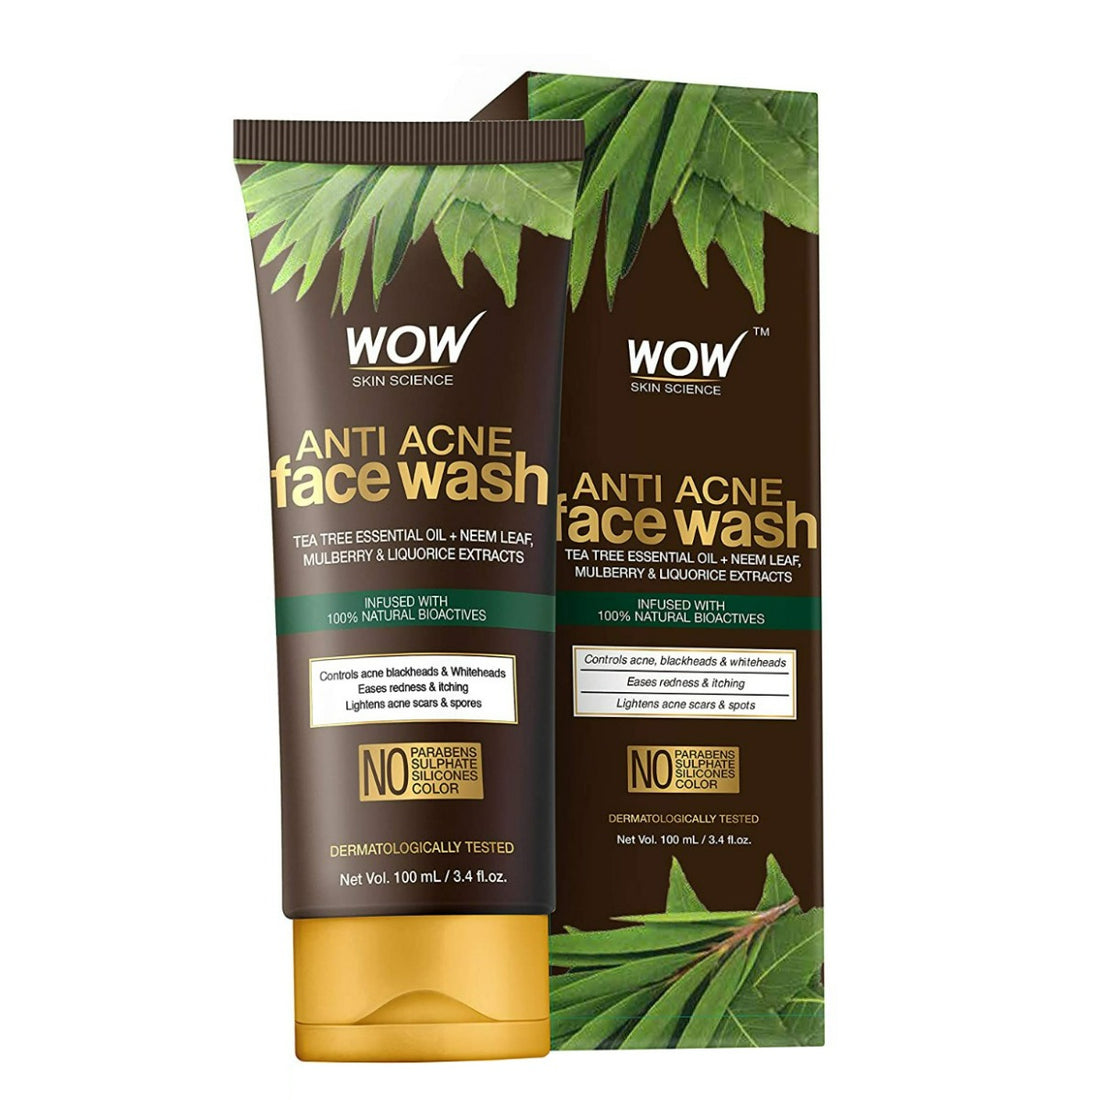 Wow Skin Science Anti Acne Face Wash (100ml)